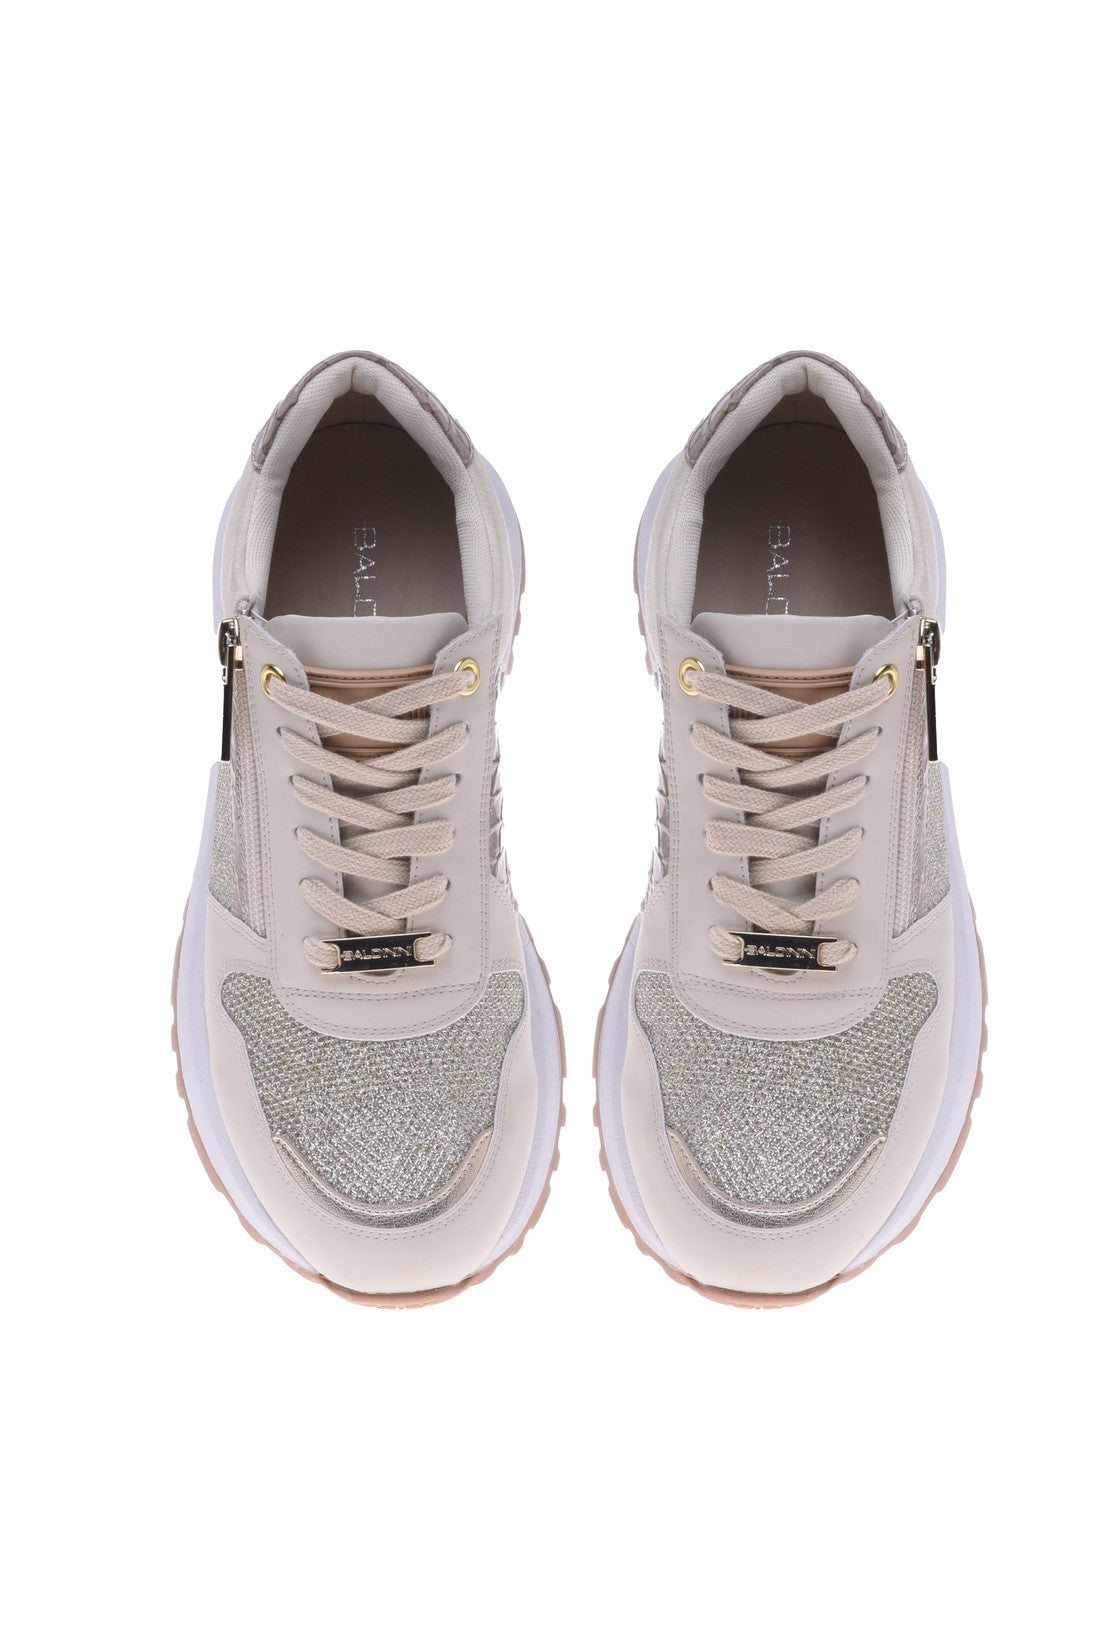 BALDININI-OUTLET-SALE-Sneaker-in-beige-and-platinum-nappa-leather-and-fabric-Sneaker-ARCHIVE-COLLECTION-2.jpg